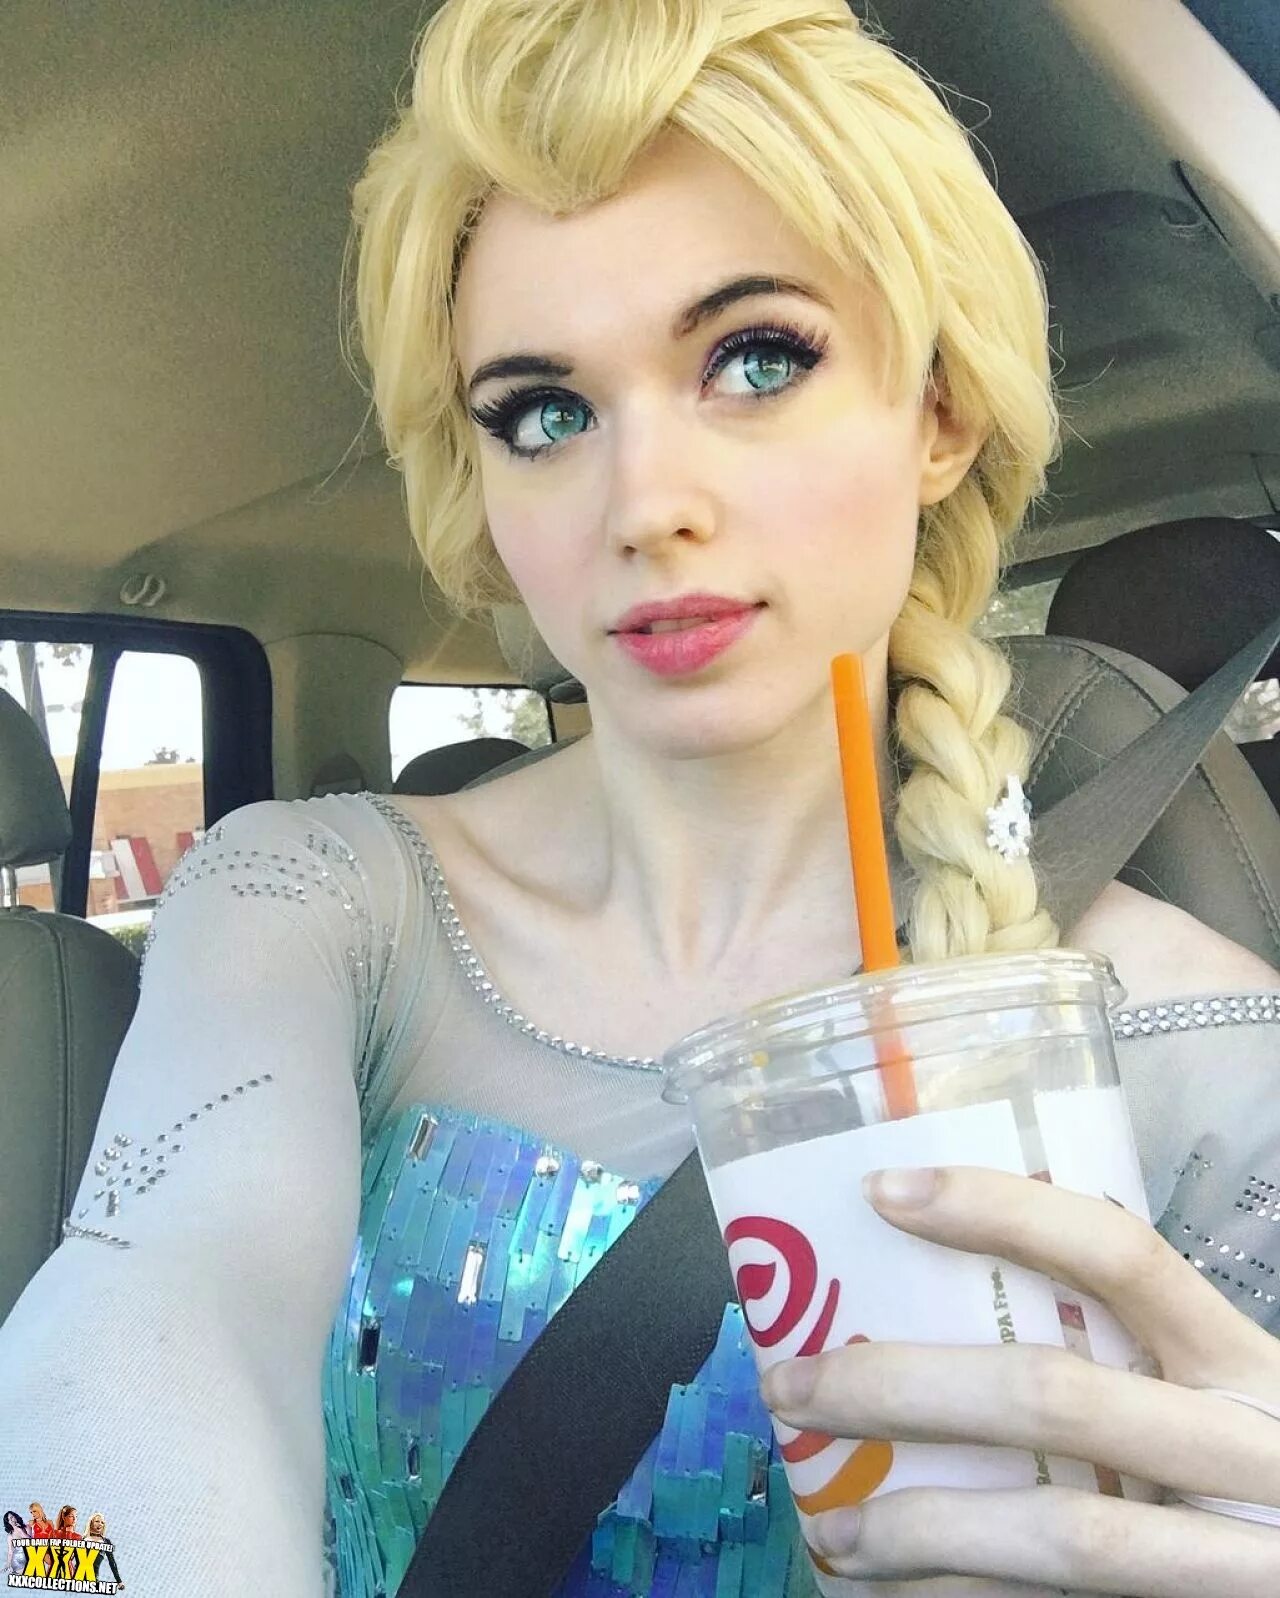 Amouranth Дафна. Amouranth Daenerys. Amouranth 2022. Amouranth АСМР.